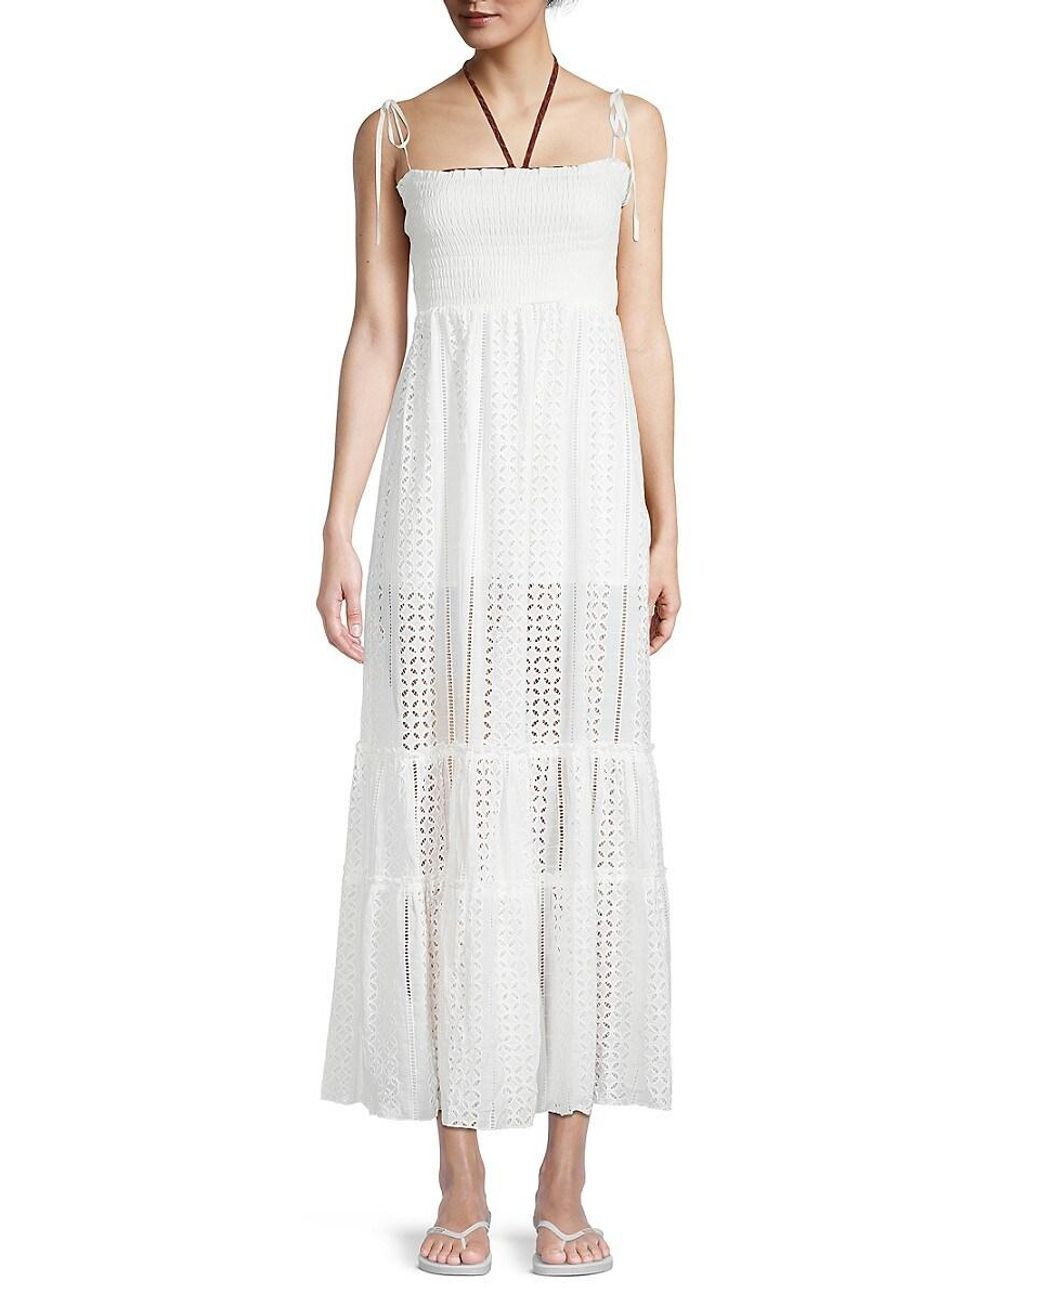 Elan Eyelet-embroidered Tiered Dress in White | Lyst